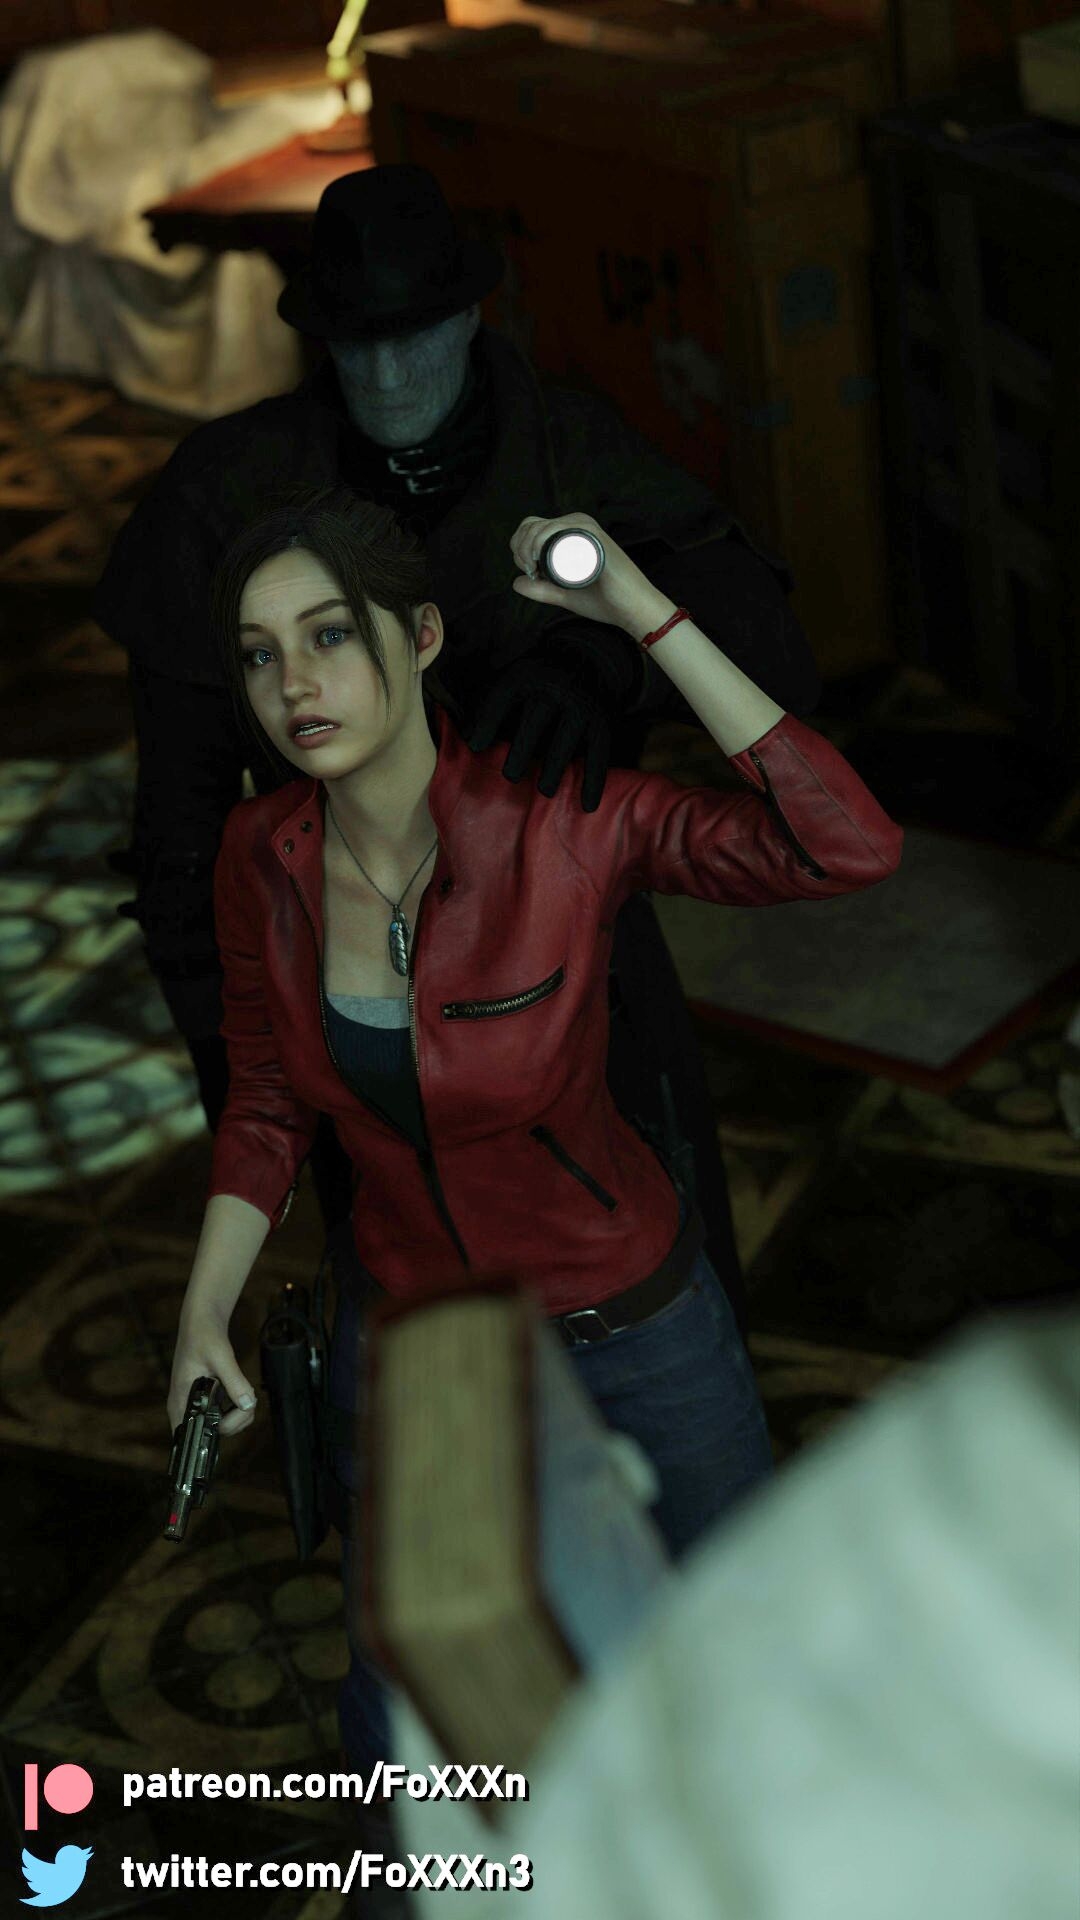 [FoXXXn] Claire Redfield and Mr.X (Resident Evil) 1